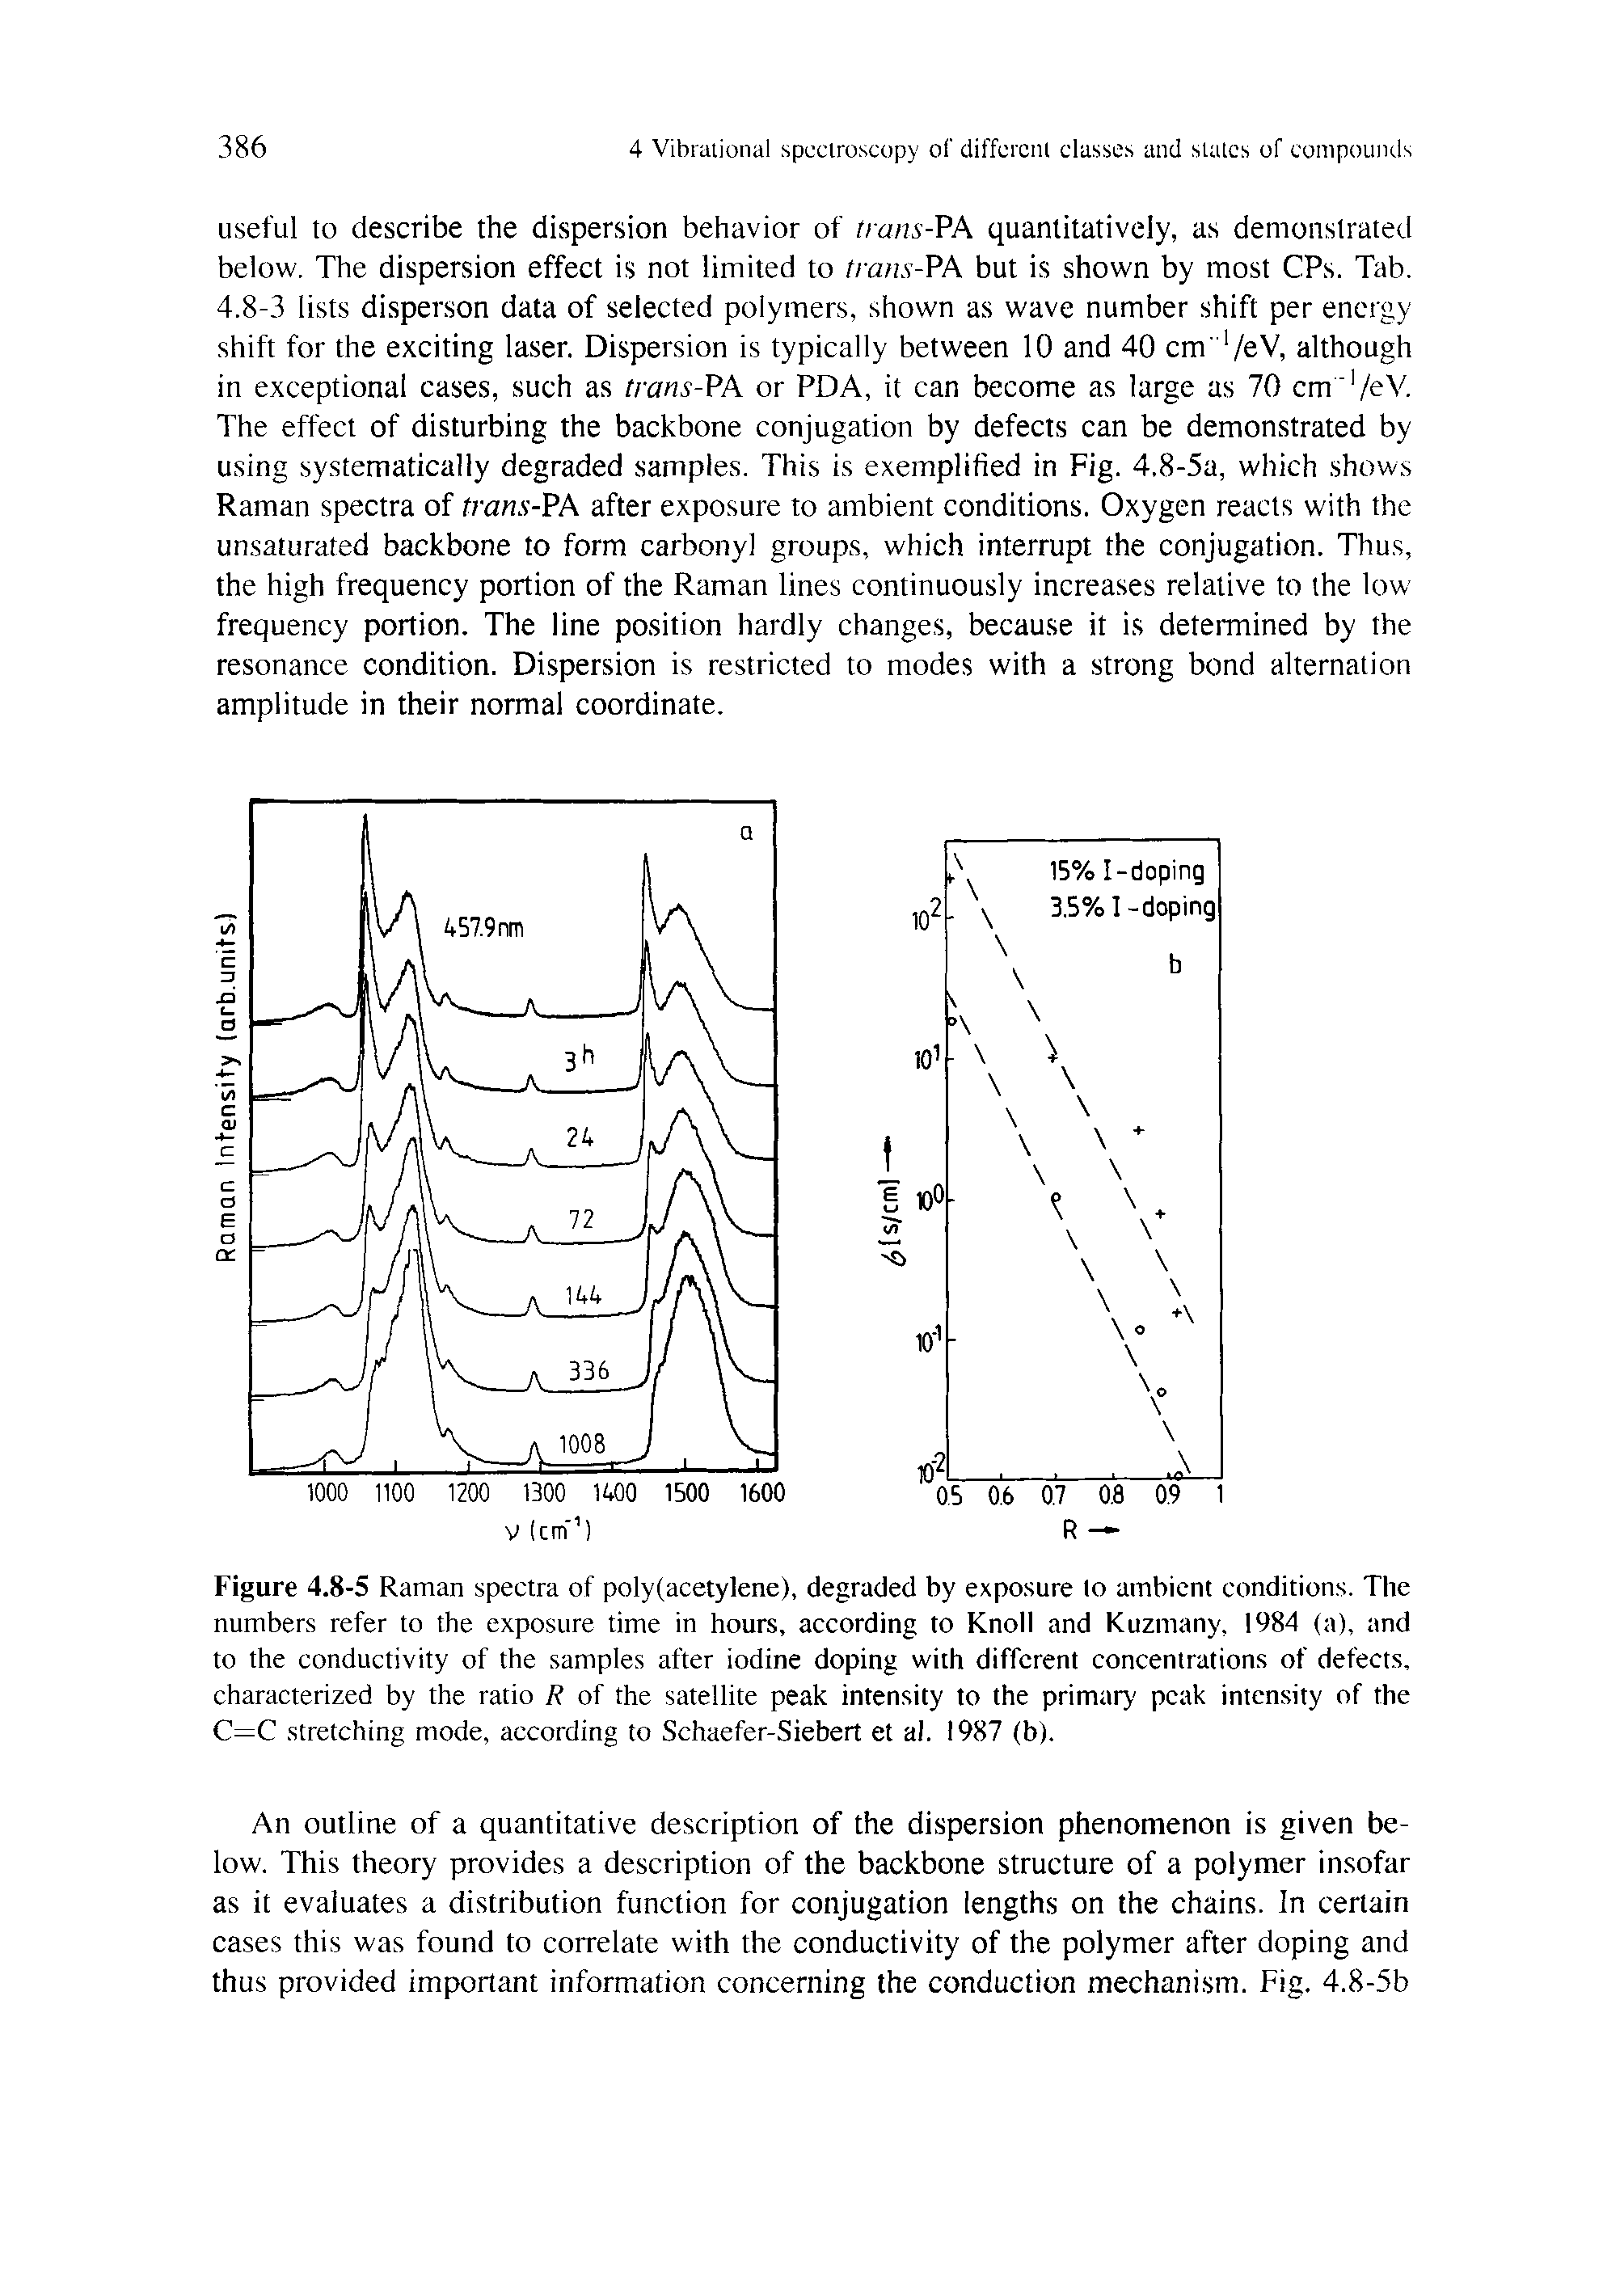 Figure 4.8-5 Raman spectra of poly(acetylene), degraded by exposure to ambient conditions. The numbers refer to the exposure time in hours, according to Knoll and Kuzmany, 1984 (a), and to the conductivity of the samples after iodine doping with different concentrations of defects, characterized by the ratio R of the satellite peak intensity to the primary- peak intensity of the C=C stretching mode, according to Schaefer-Siebert et al. 1987 (b).